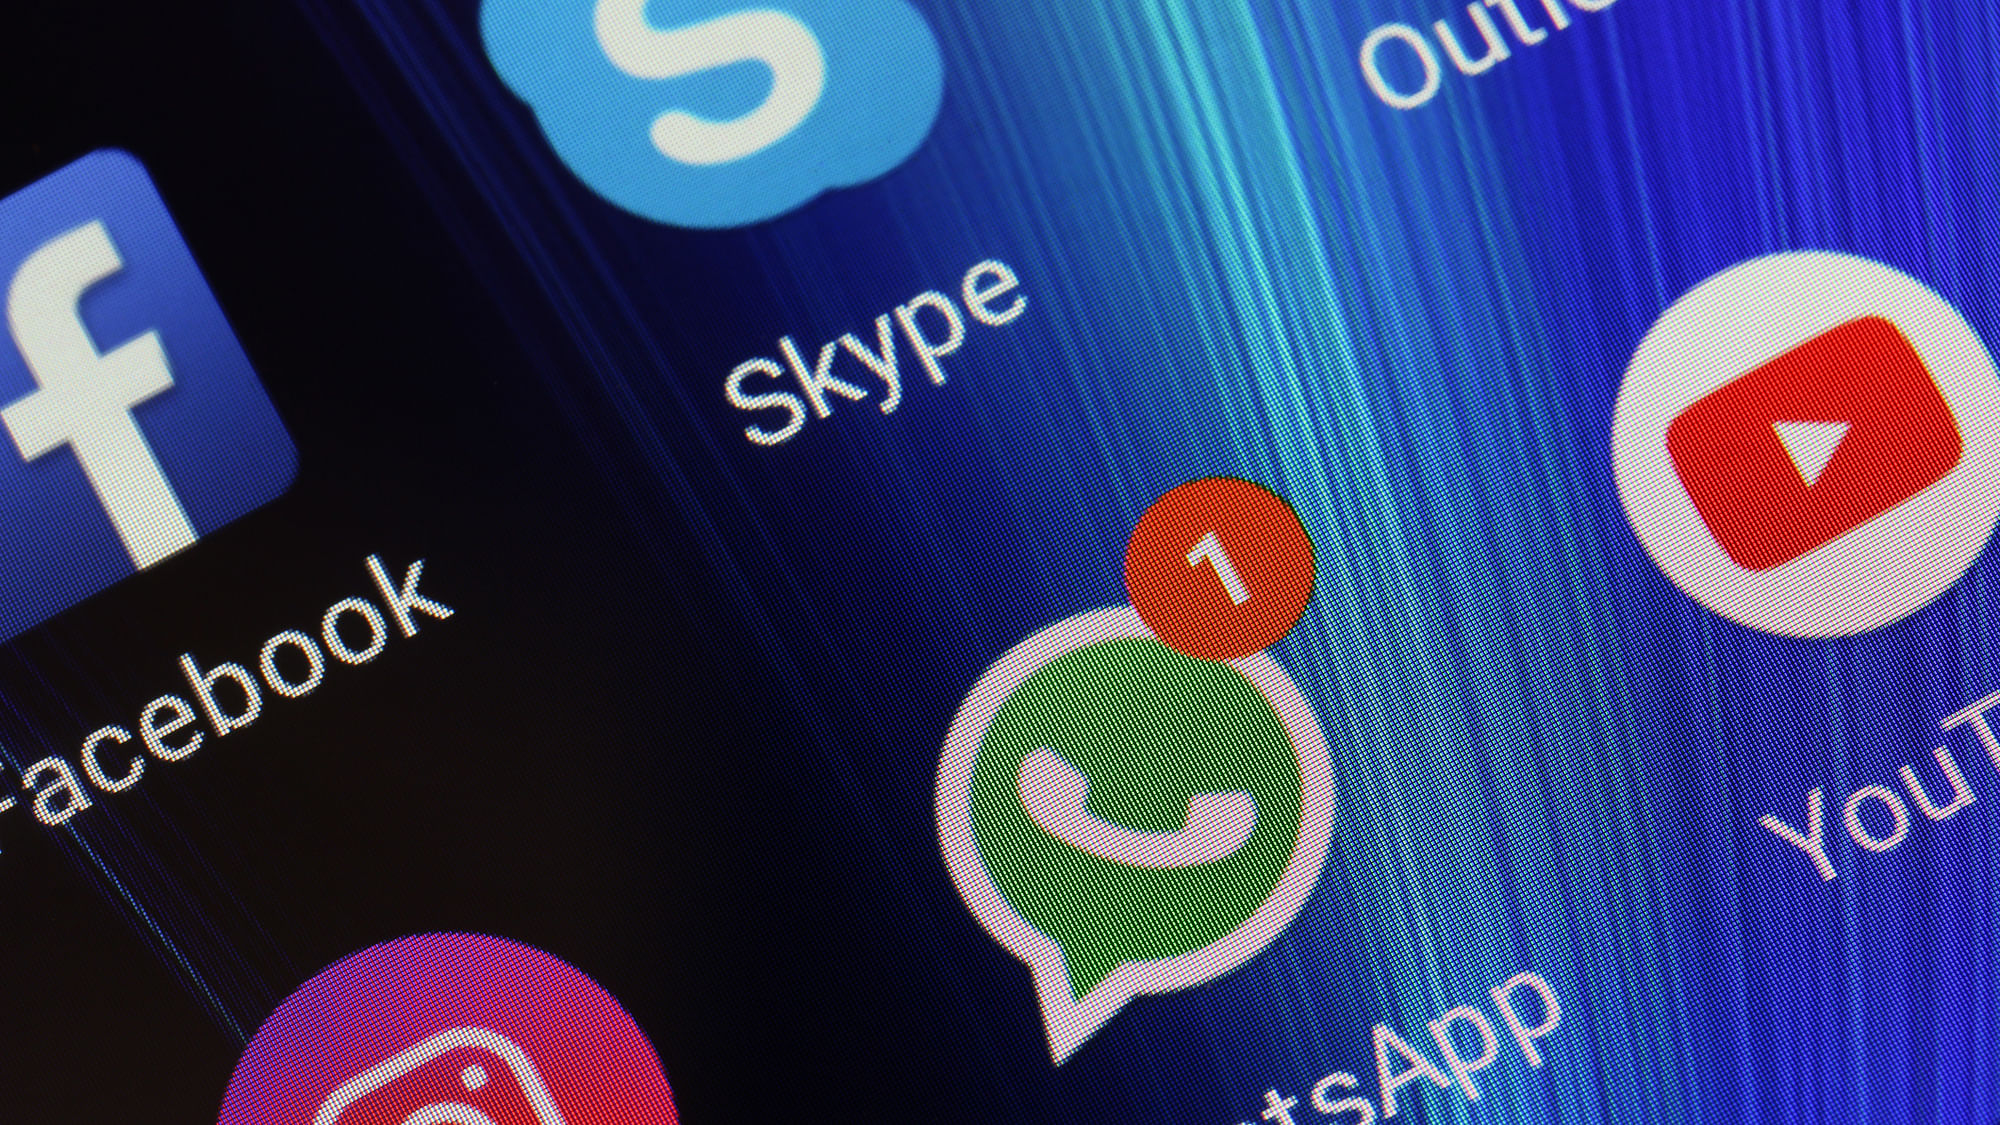 WhatsApp is getting a new feature in the coming weeks, but do we need it?